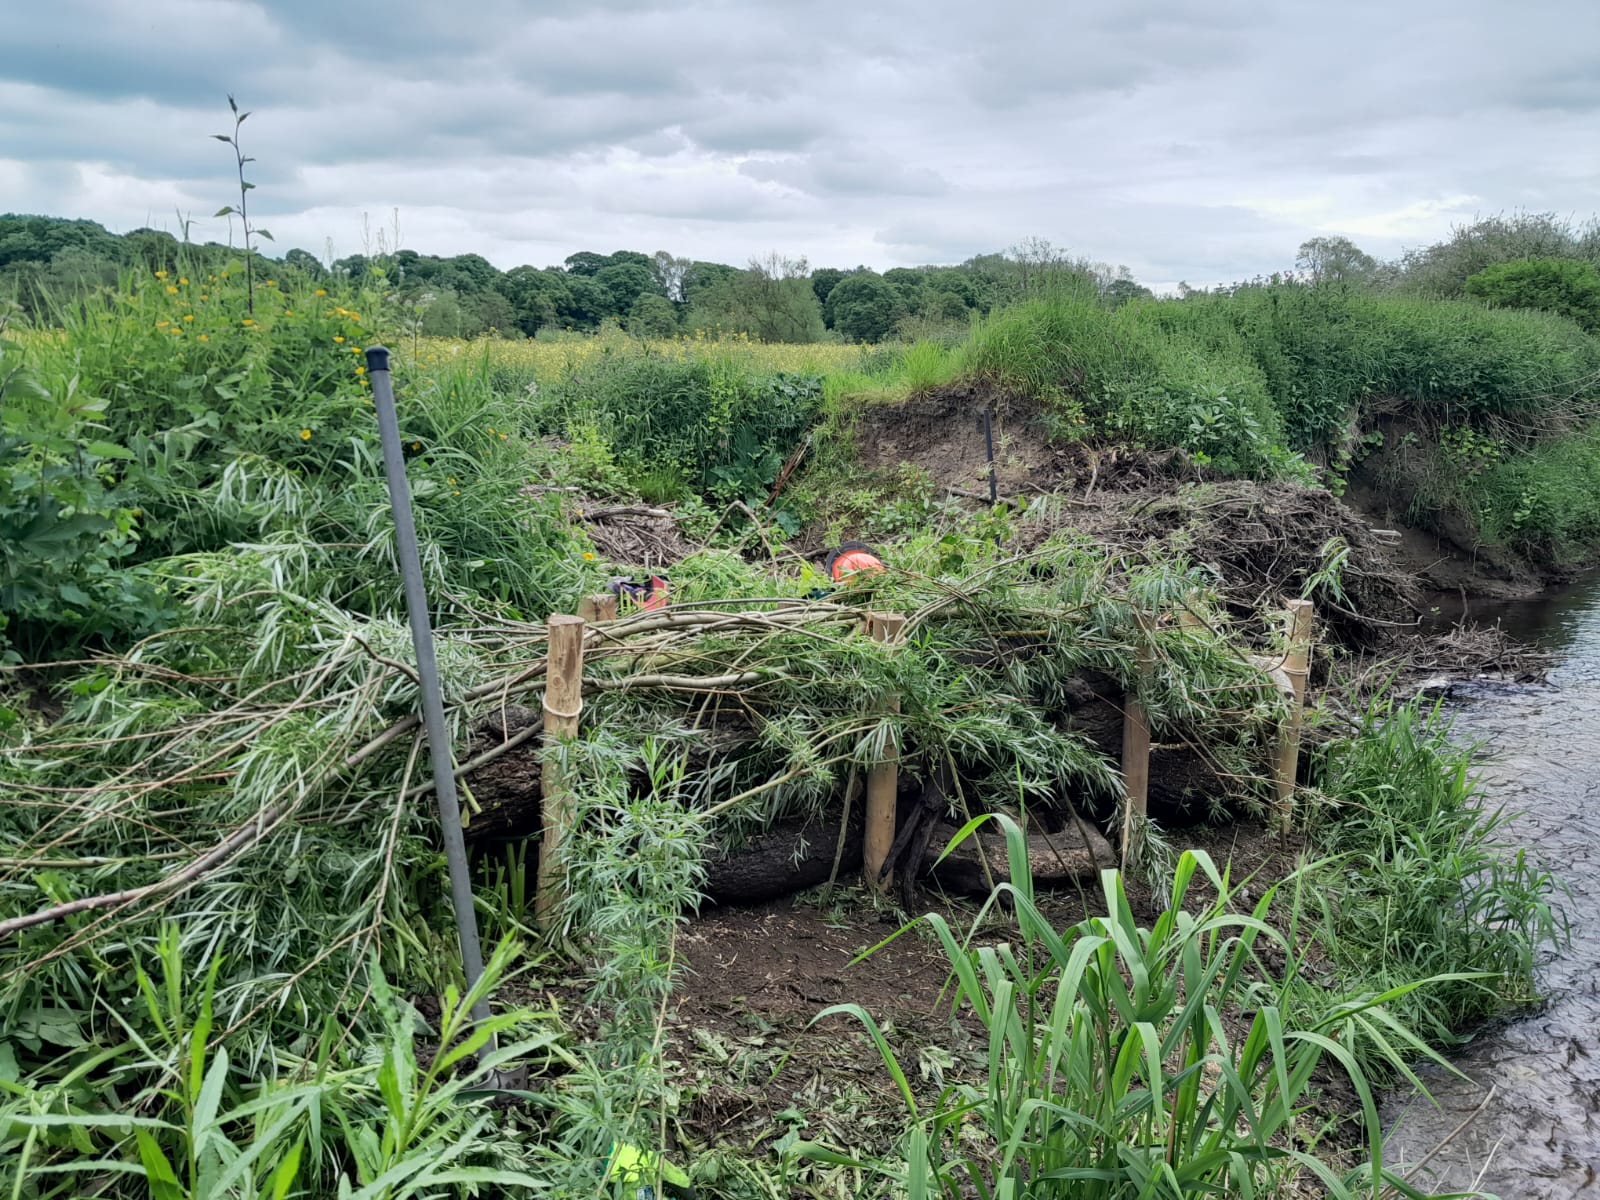 An image of an erosion repair on the river Browney. The image shows a collapsed bank in the background, and some green engineering in the foreground. The repairs include a series of posts with large wood debris and willow weaved in between.